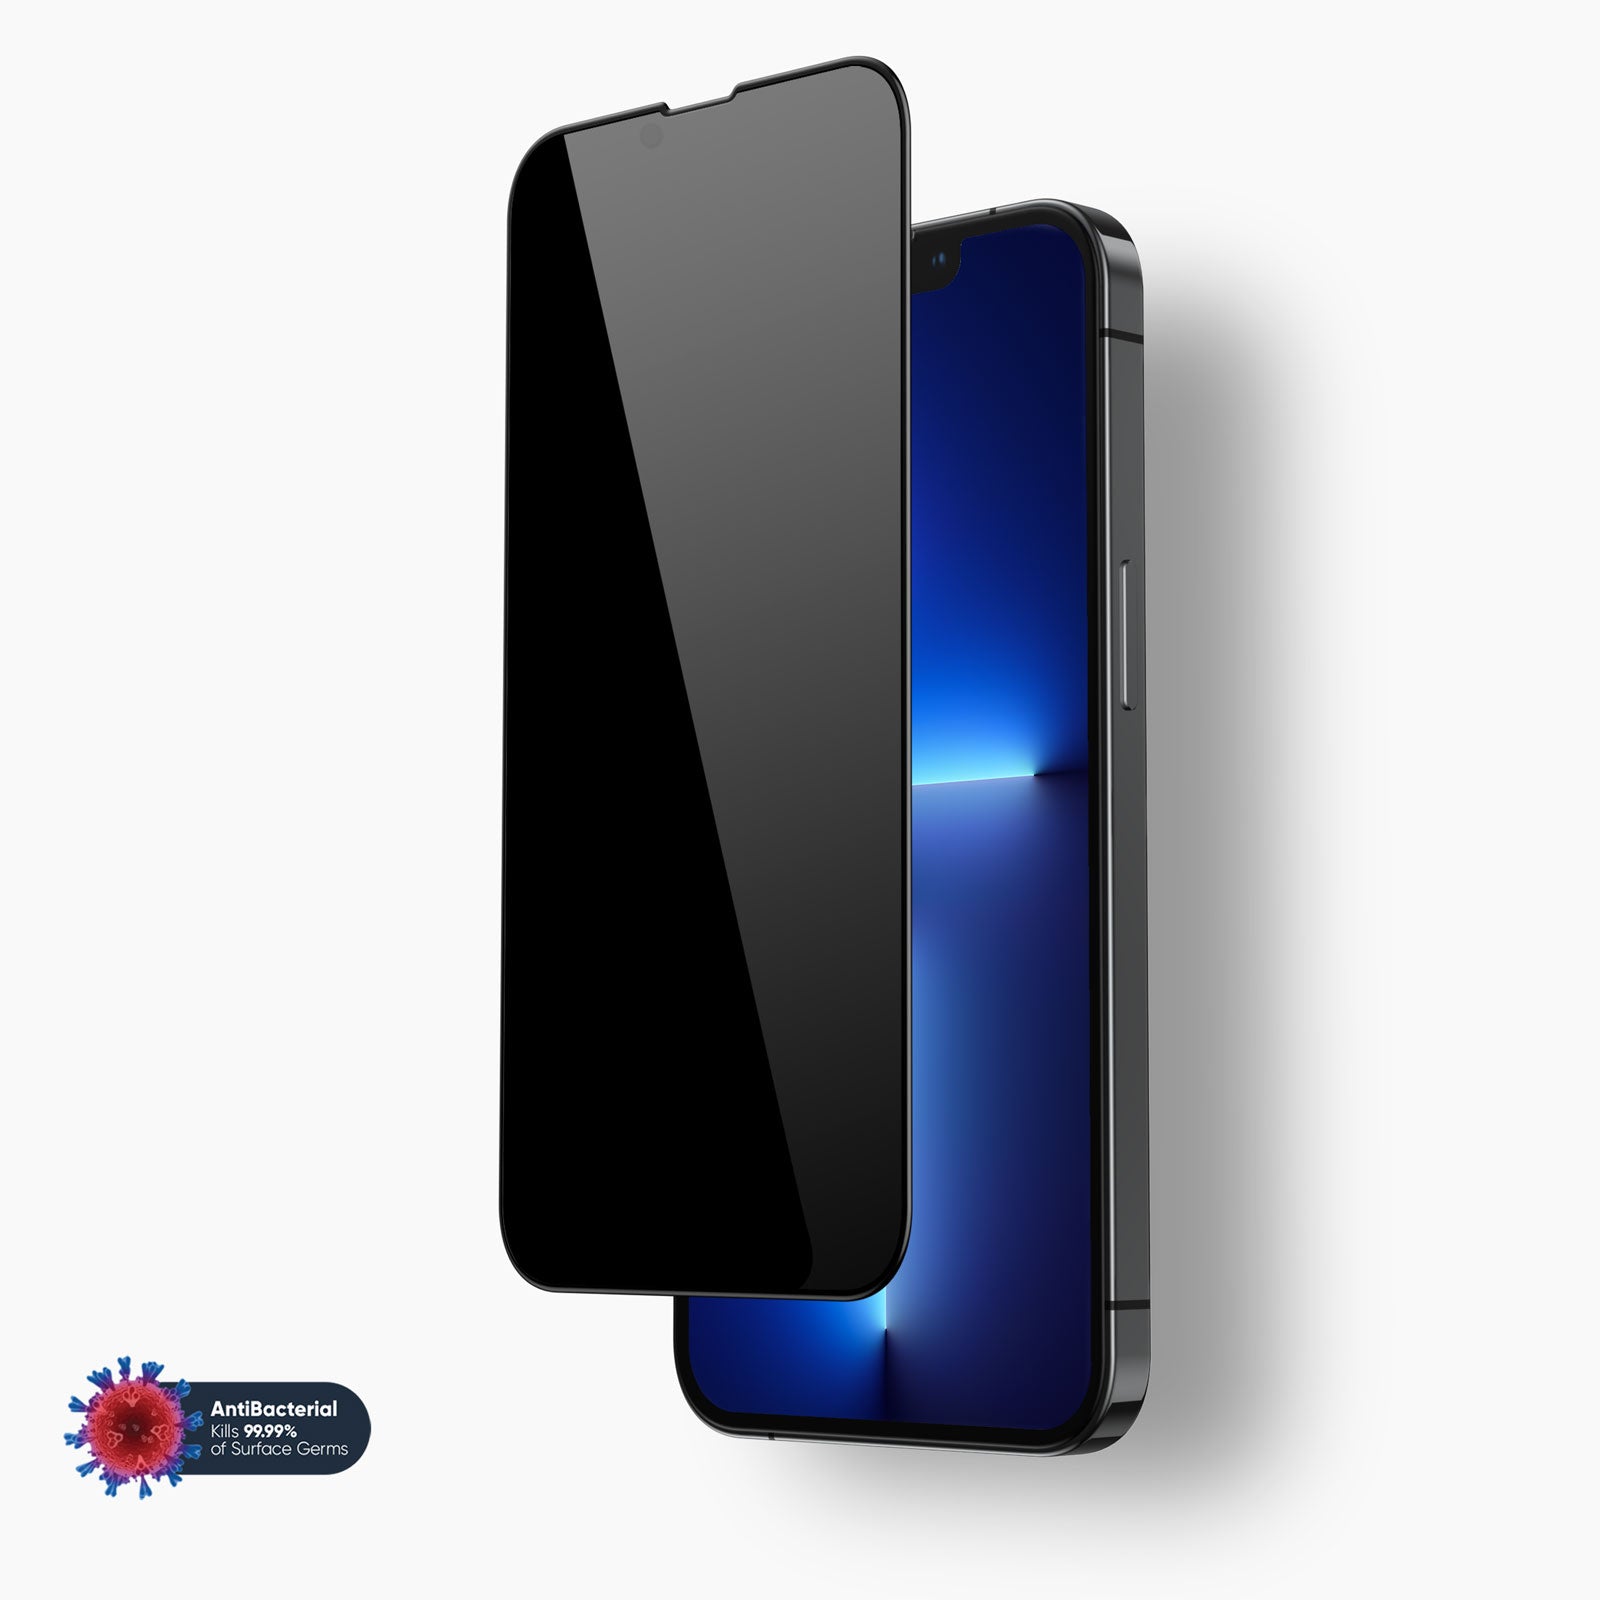 FLOLAB NanoArmour I Best Screen Protector for iPhone XS / X